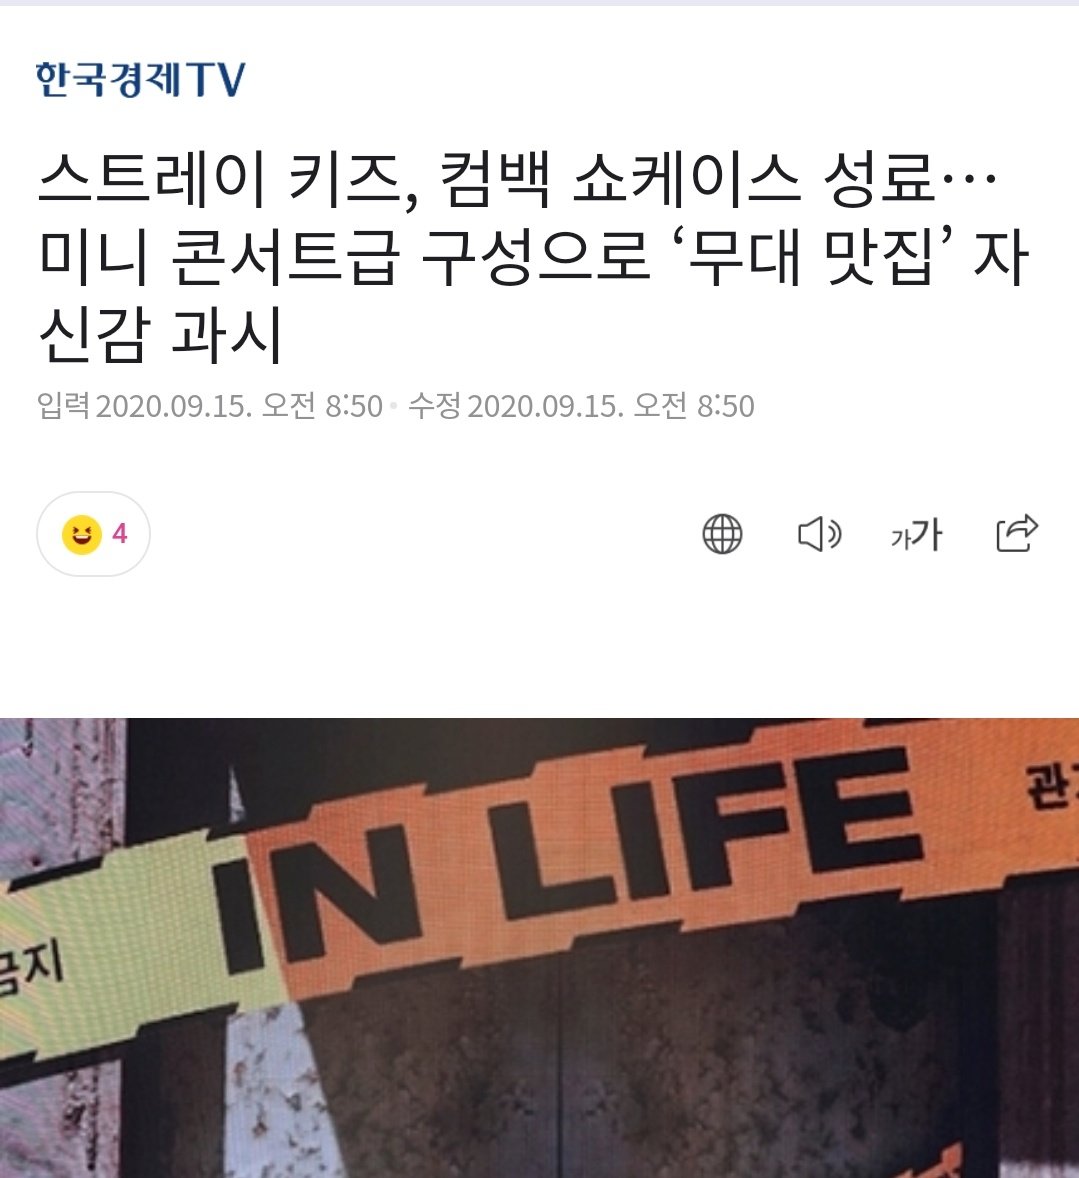  2 NEW ARTICLESAs of 9:18 am KST, there is a TOTAL of 7 ARTICLES6  http://naver.me/FkpZHVpW 7  http://naver.me/IDE8PX2K  #StrayKids  #스트레이키즈 #SKZSupportTeam++ CHECK FOR UPDATES